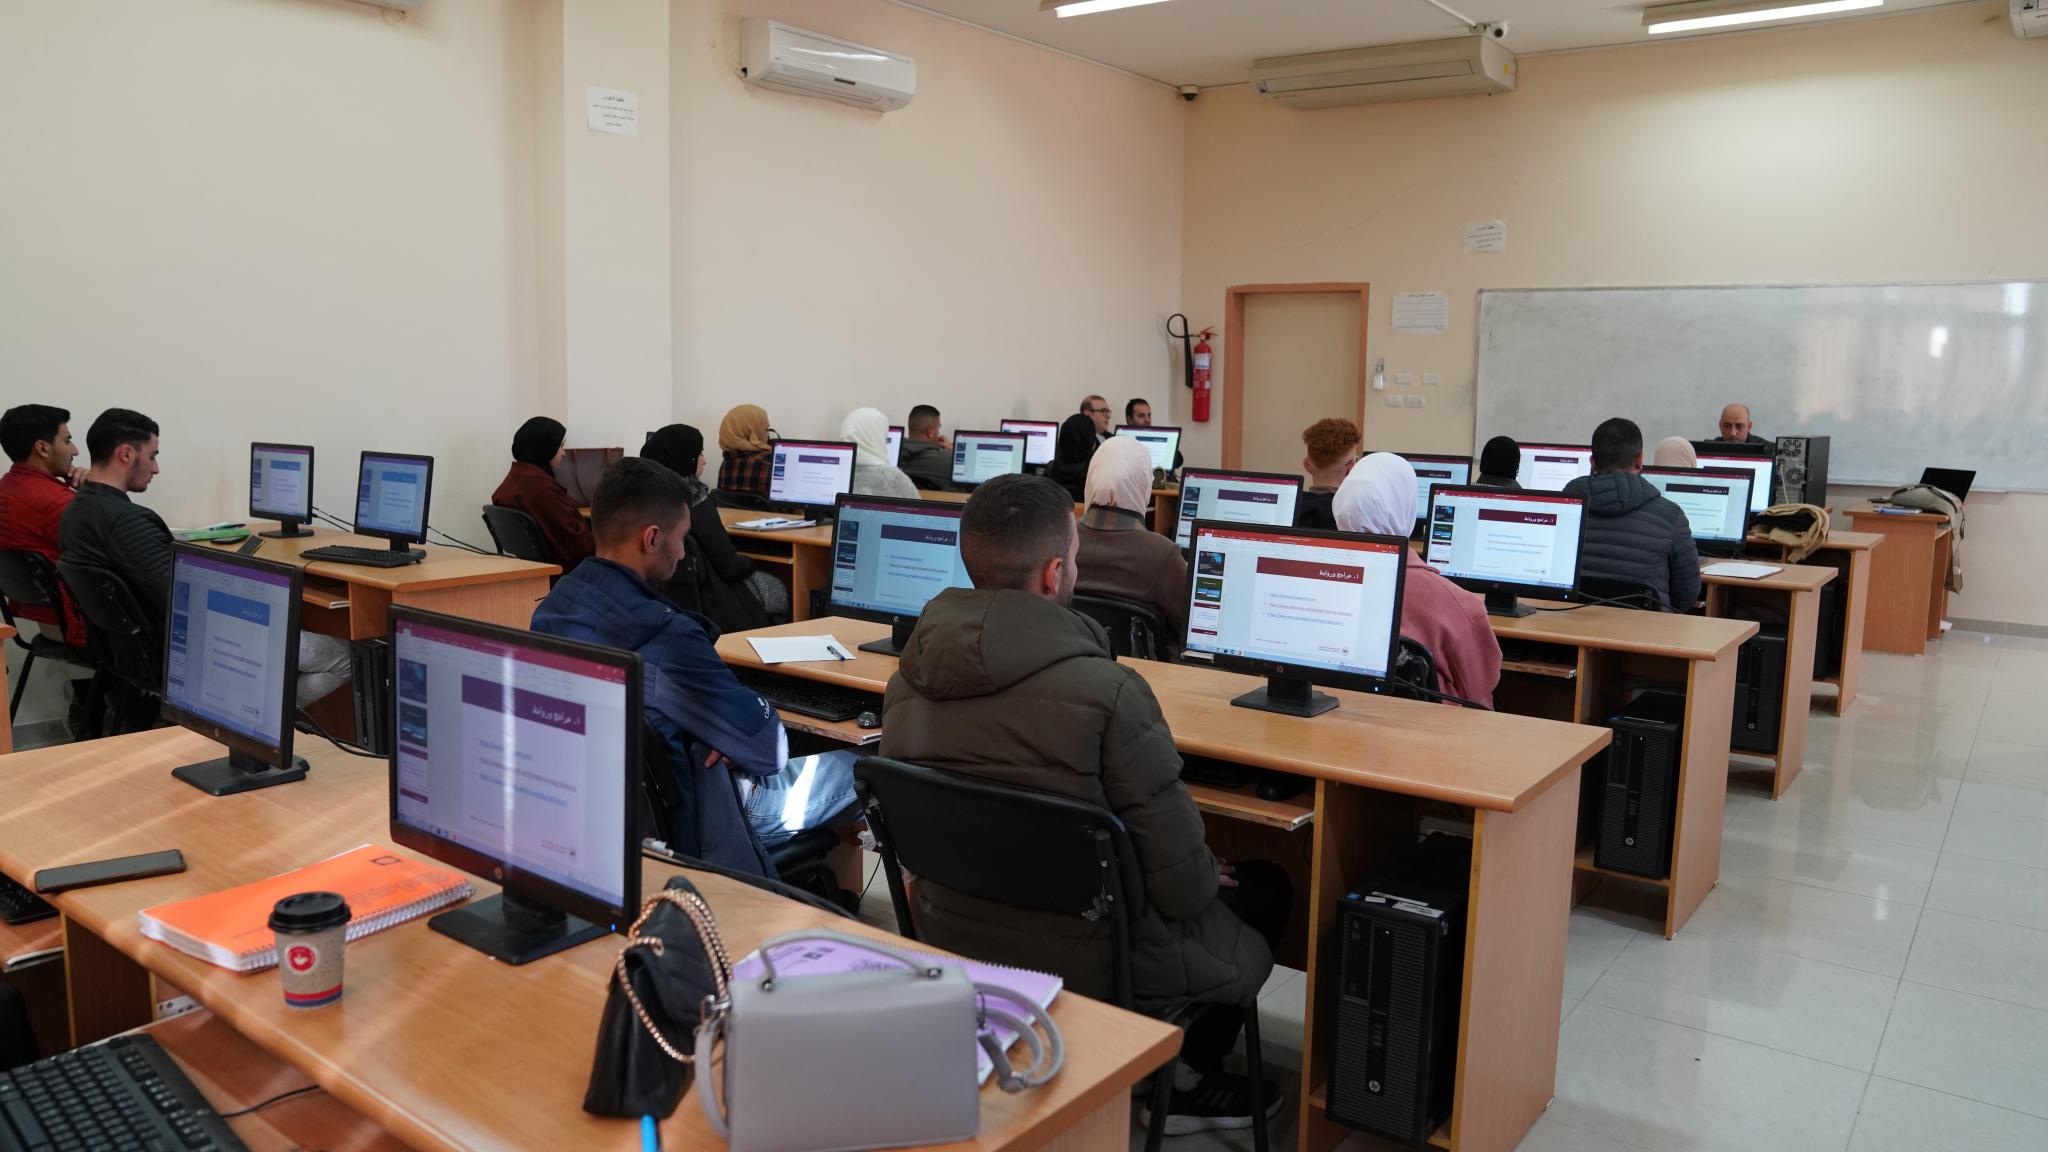 An Awareness Course about Information Security and Managing Electronic Accounts